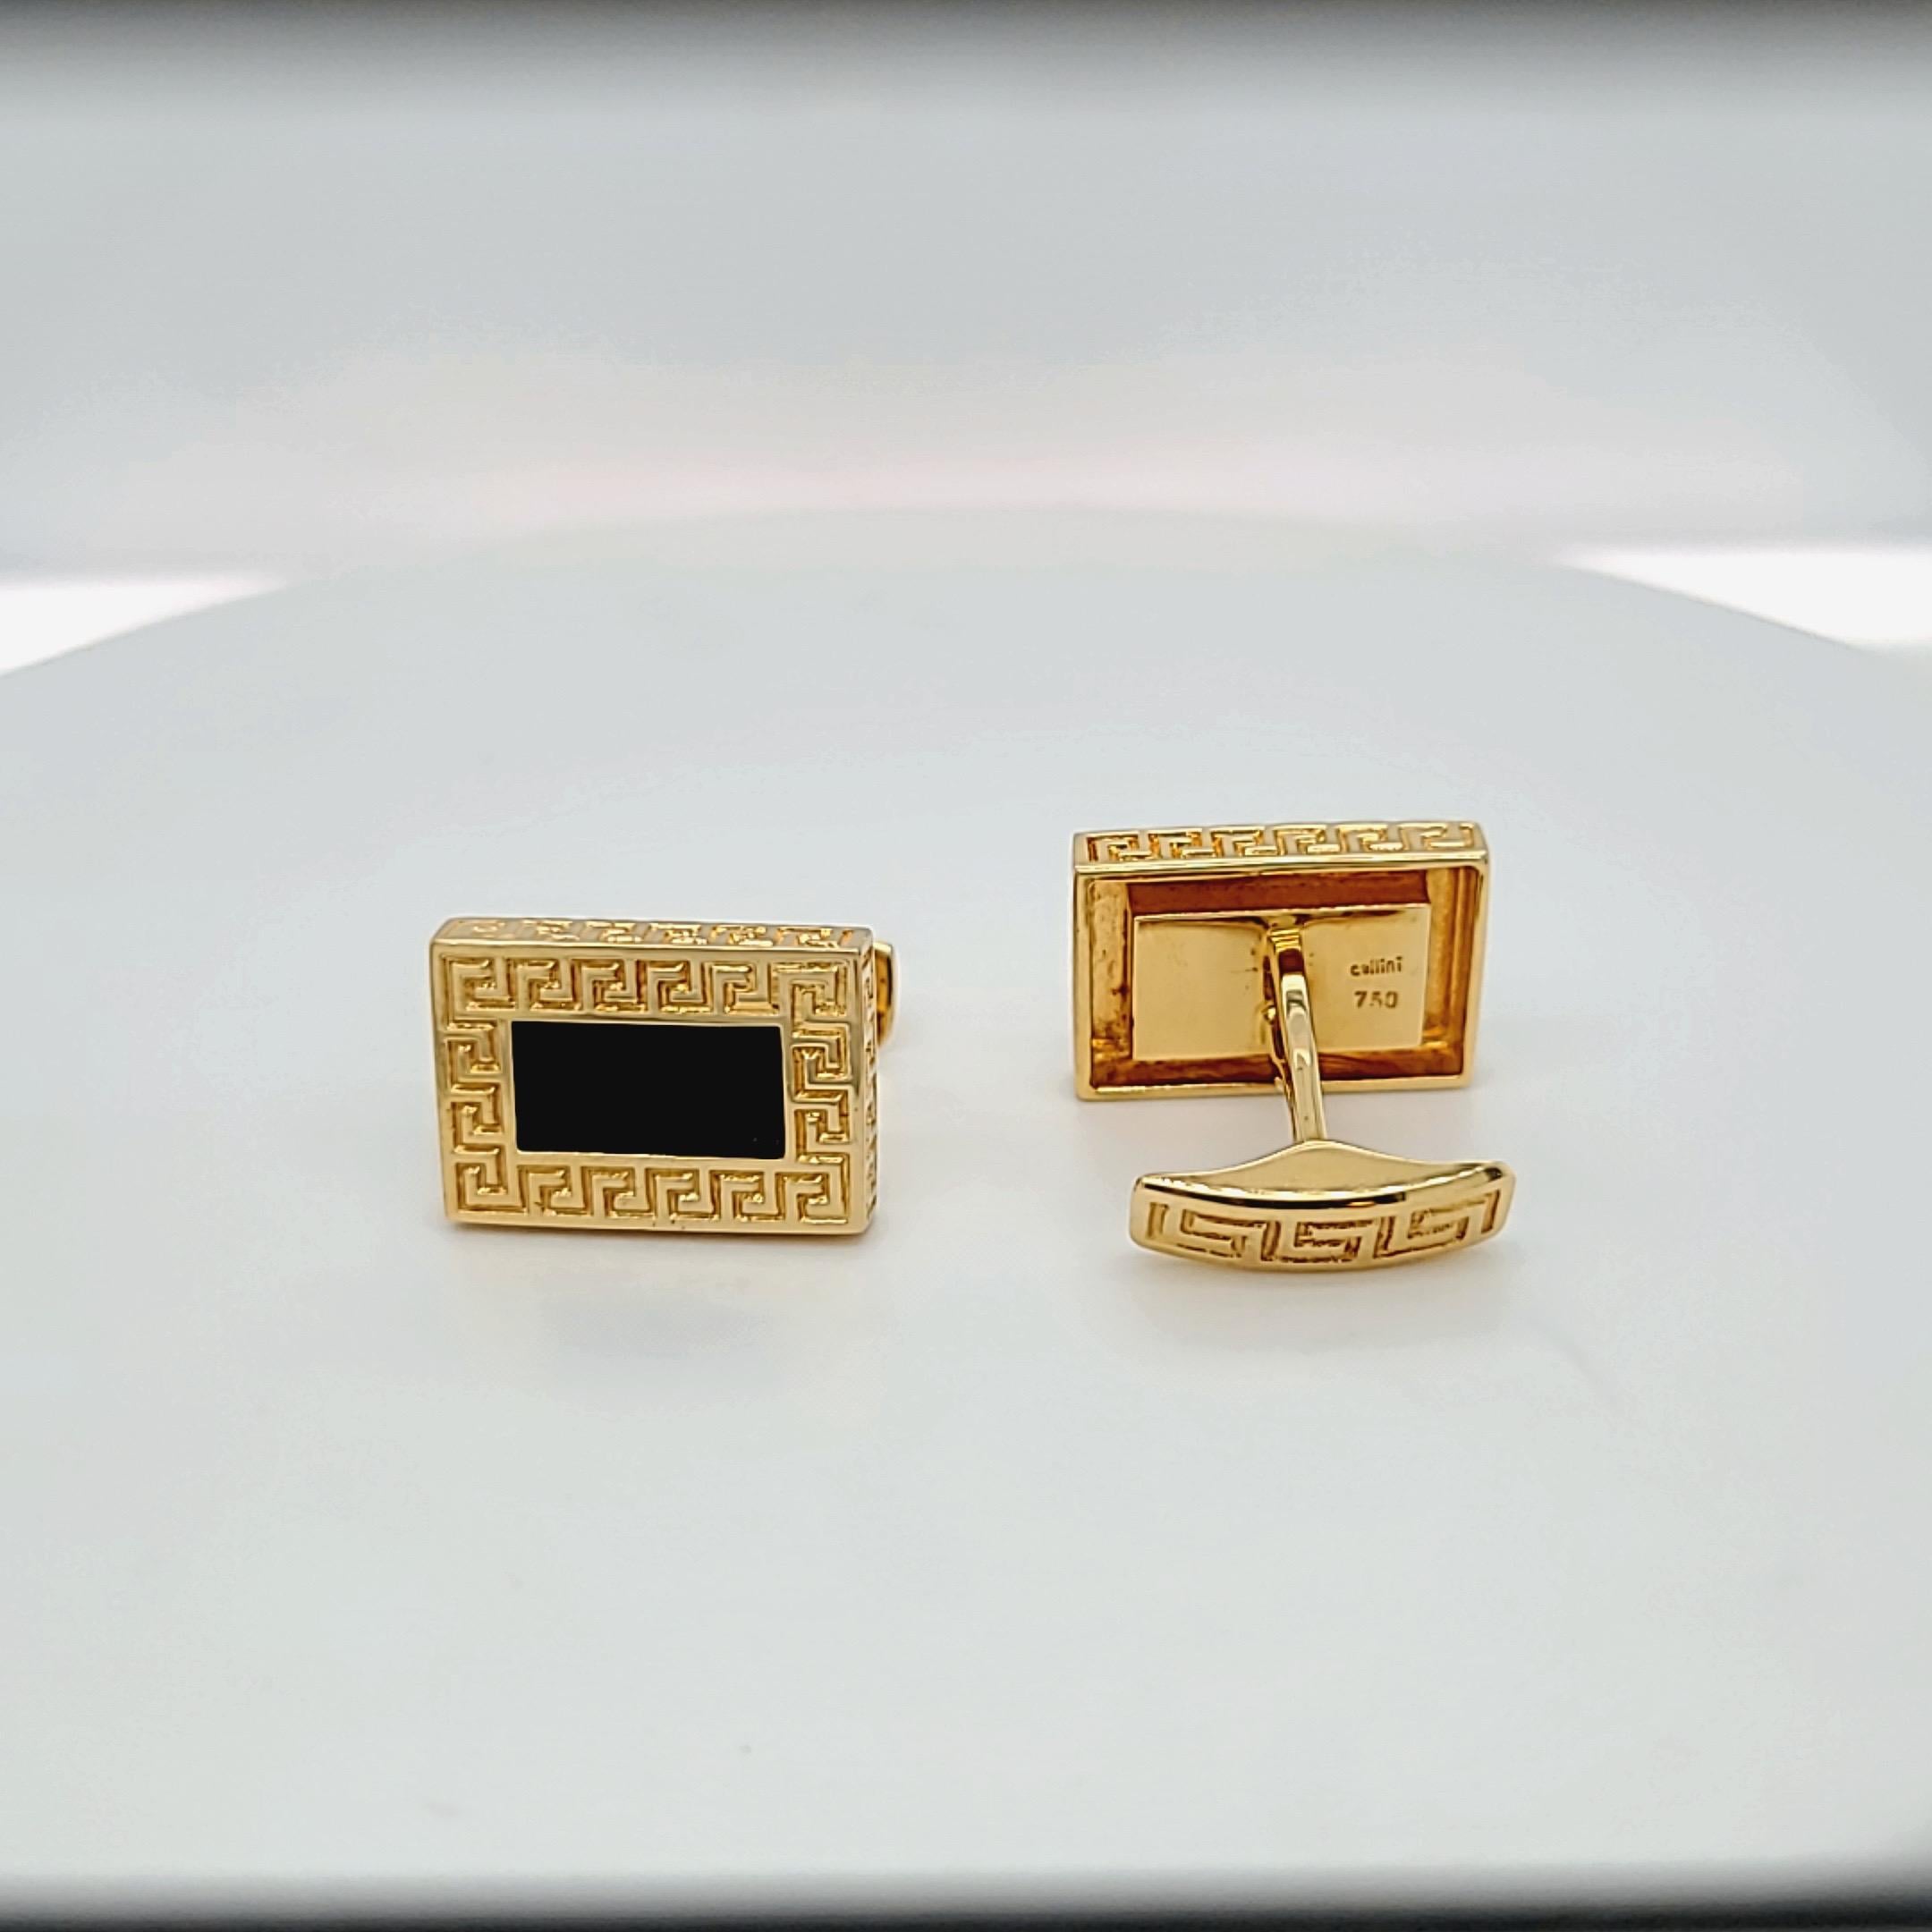 Classic  Cellini 18 karat yellow gold cuff links. The rectangular cuff links center black onyx and are bordered and edged with a Greek key motif. The bar back cuff links measure 7/8